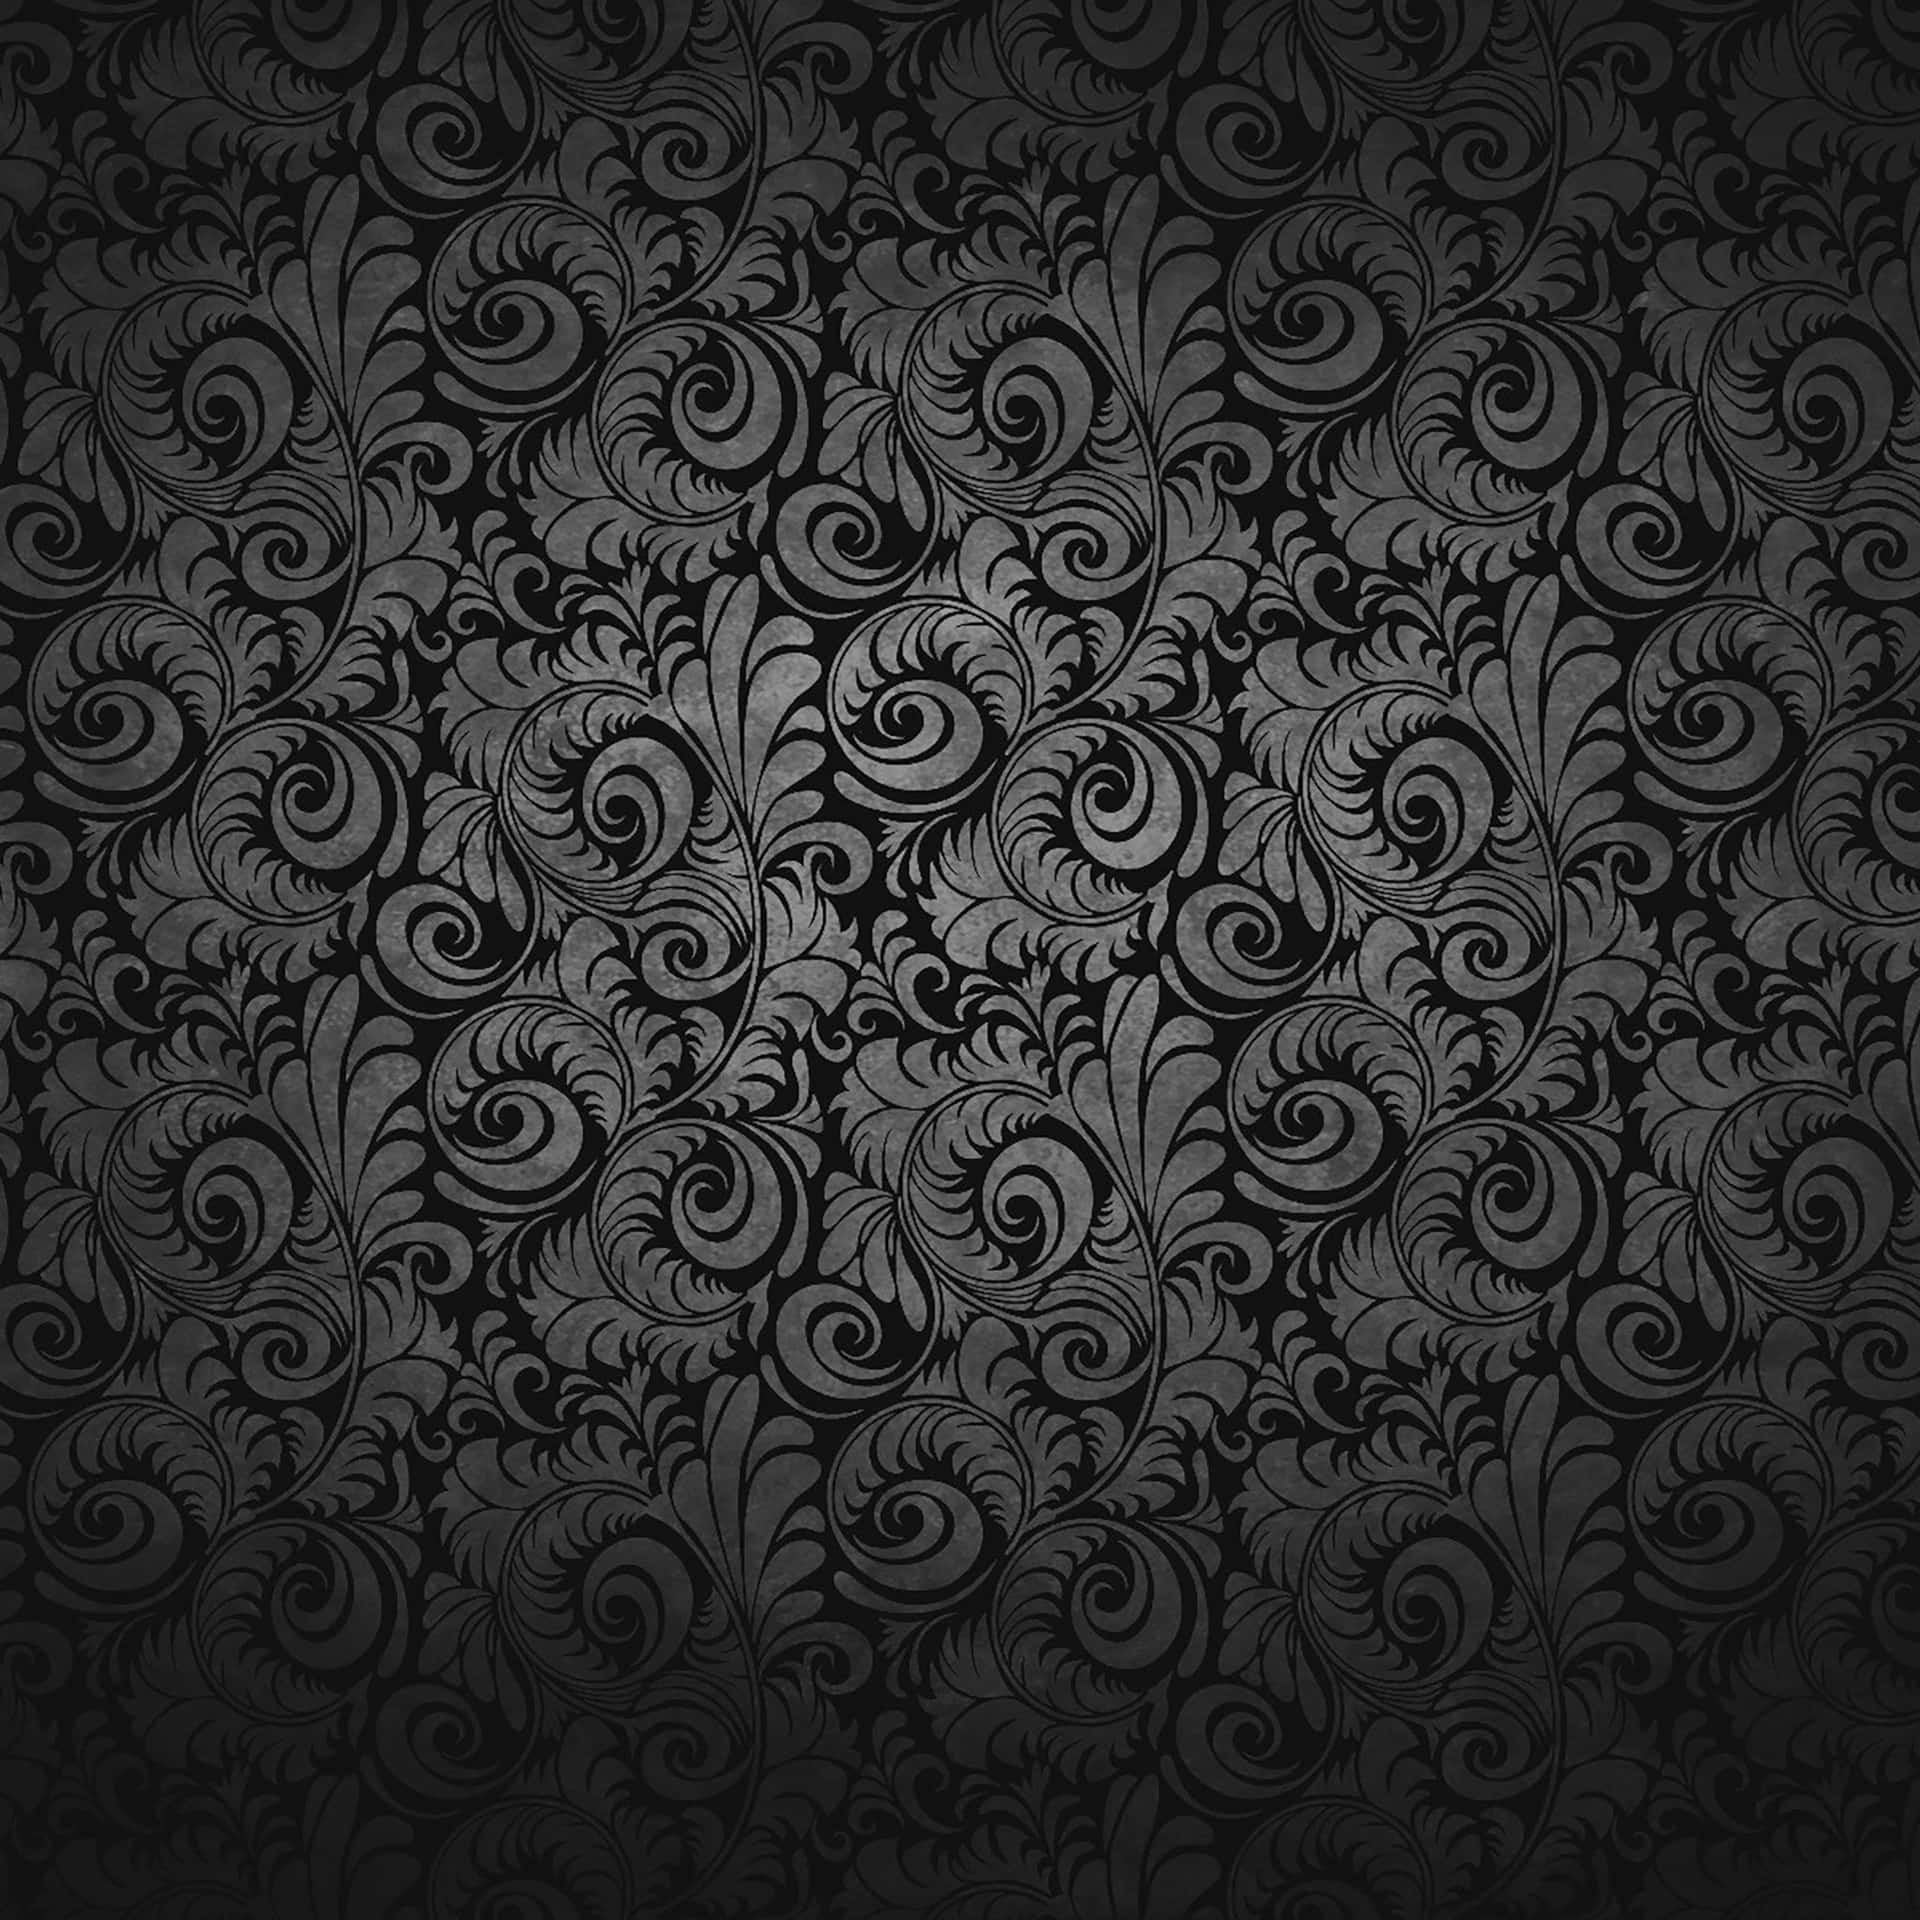 Black Ipad With Spiral Abstract Patterns Wallpaper